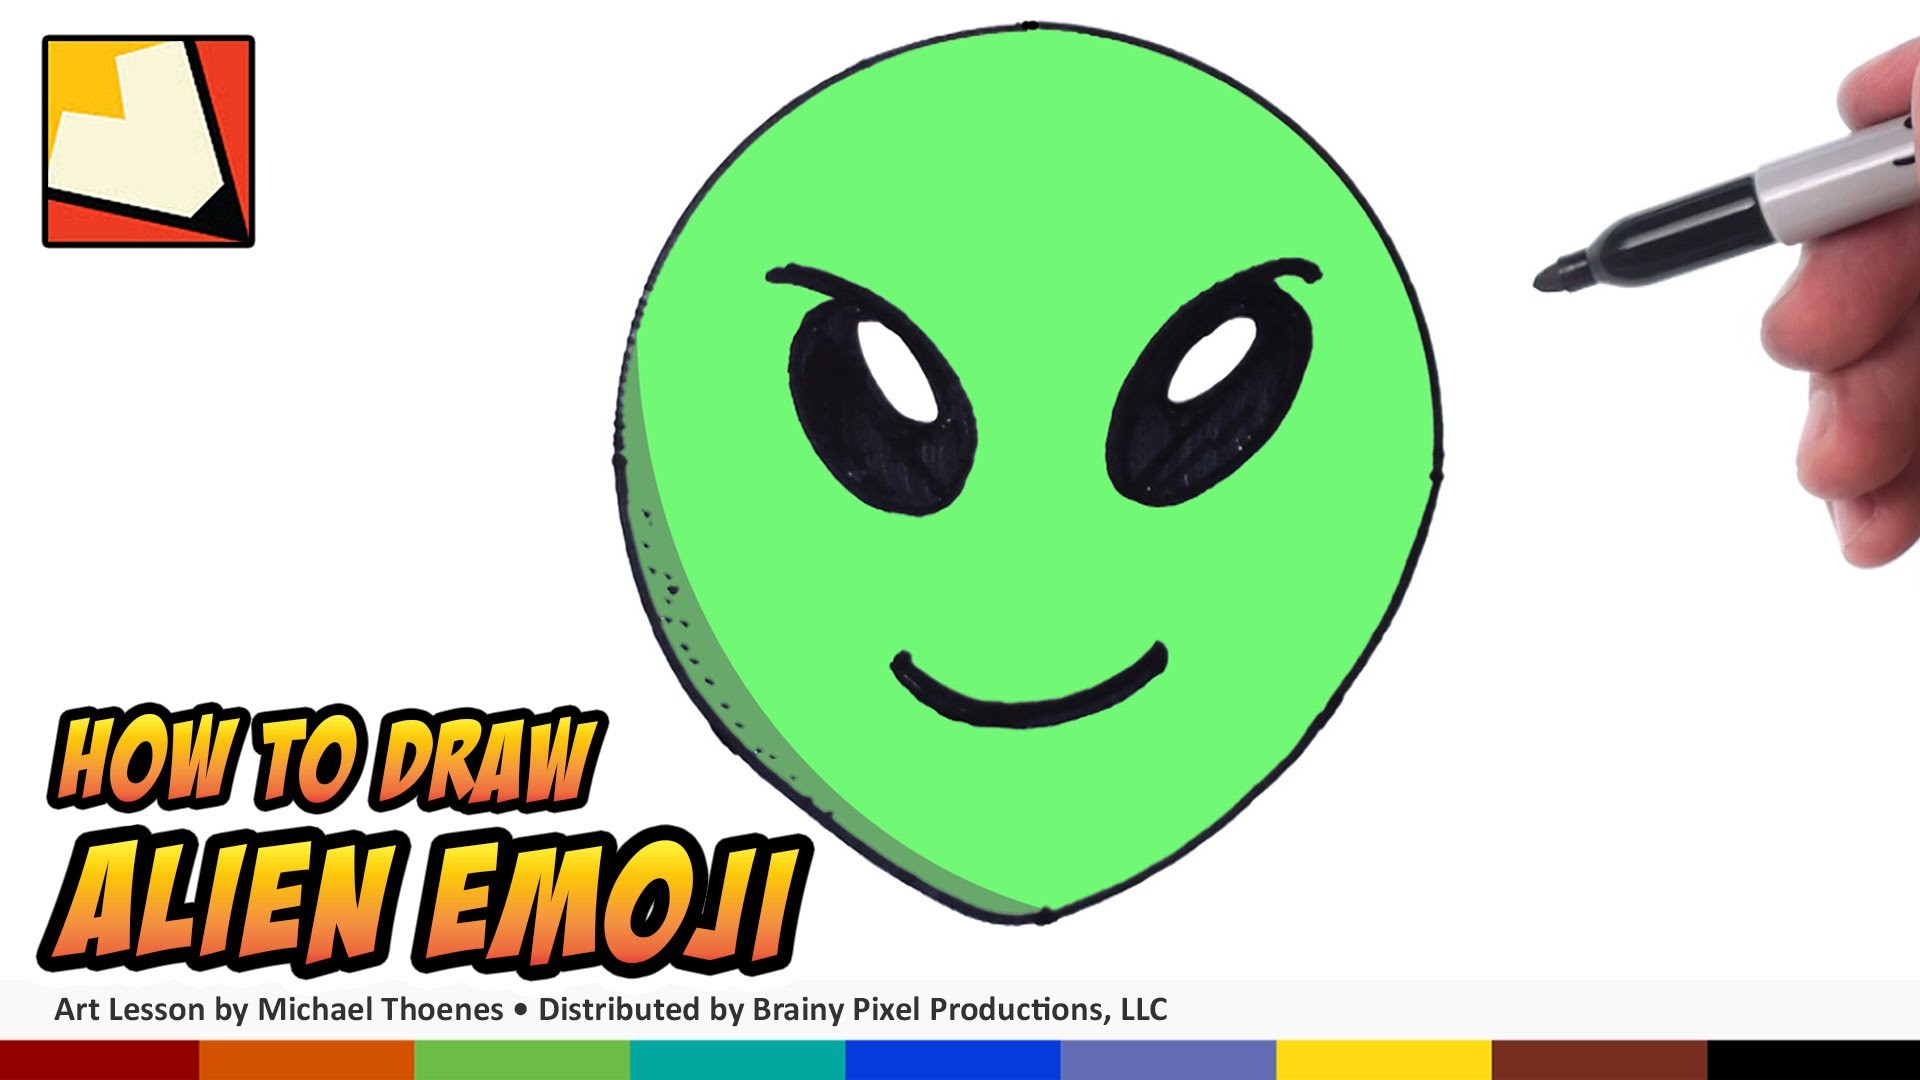 1920x1080 How to Draw Emoijs - Alien Emoji - Step by Step for Beginners | BP - YouTube